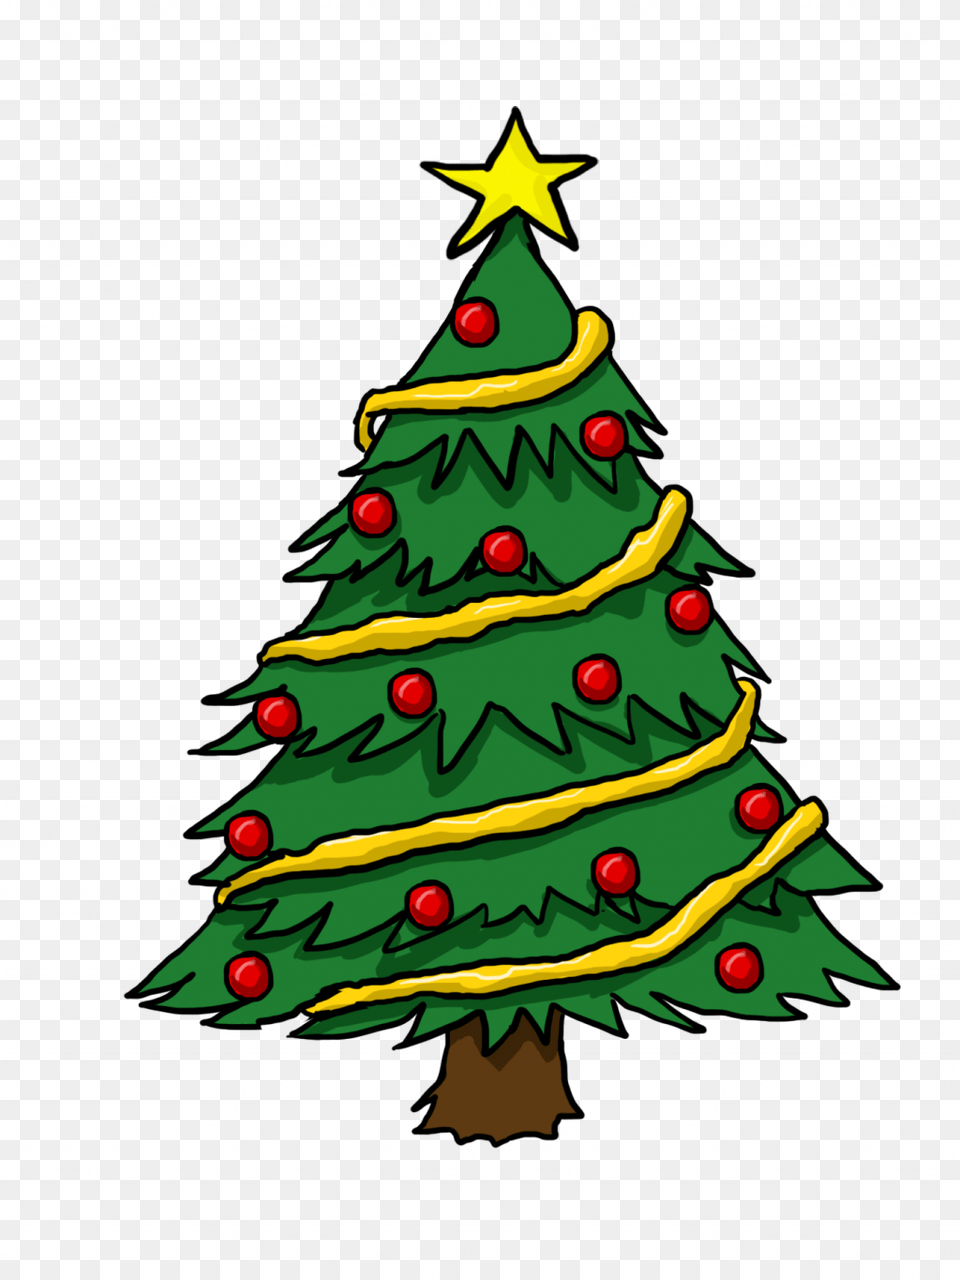 Cliparts For Evergreen Clipart Tree Cutout Simple Christmas Tree Cartoon, Plant, Christmas Decorations, Festival, Christmas Tree Free Png